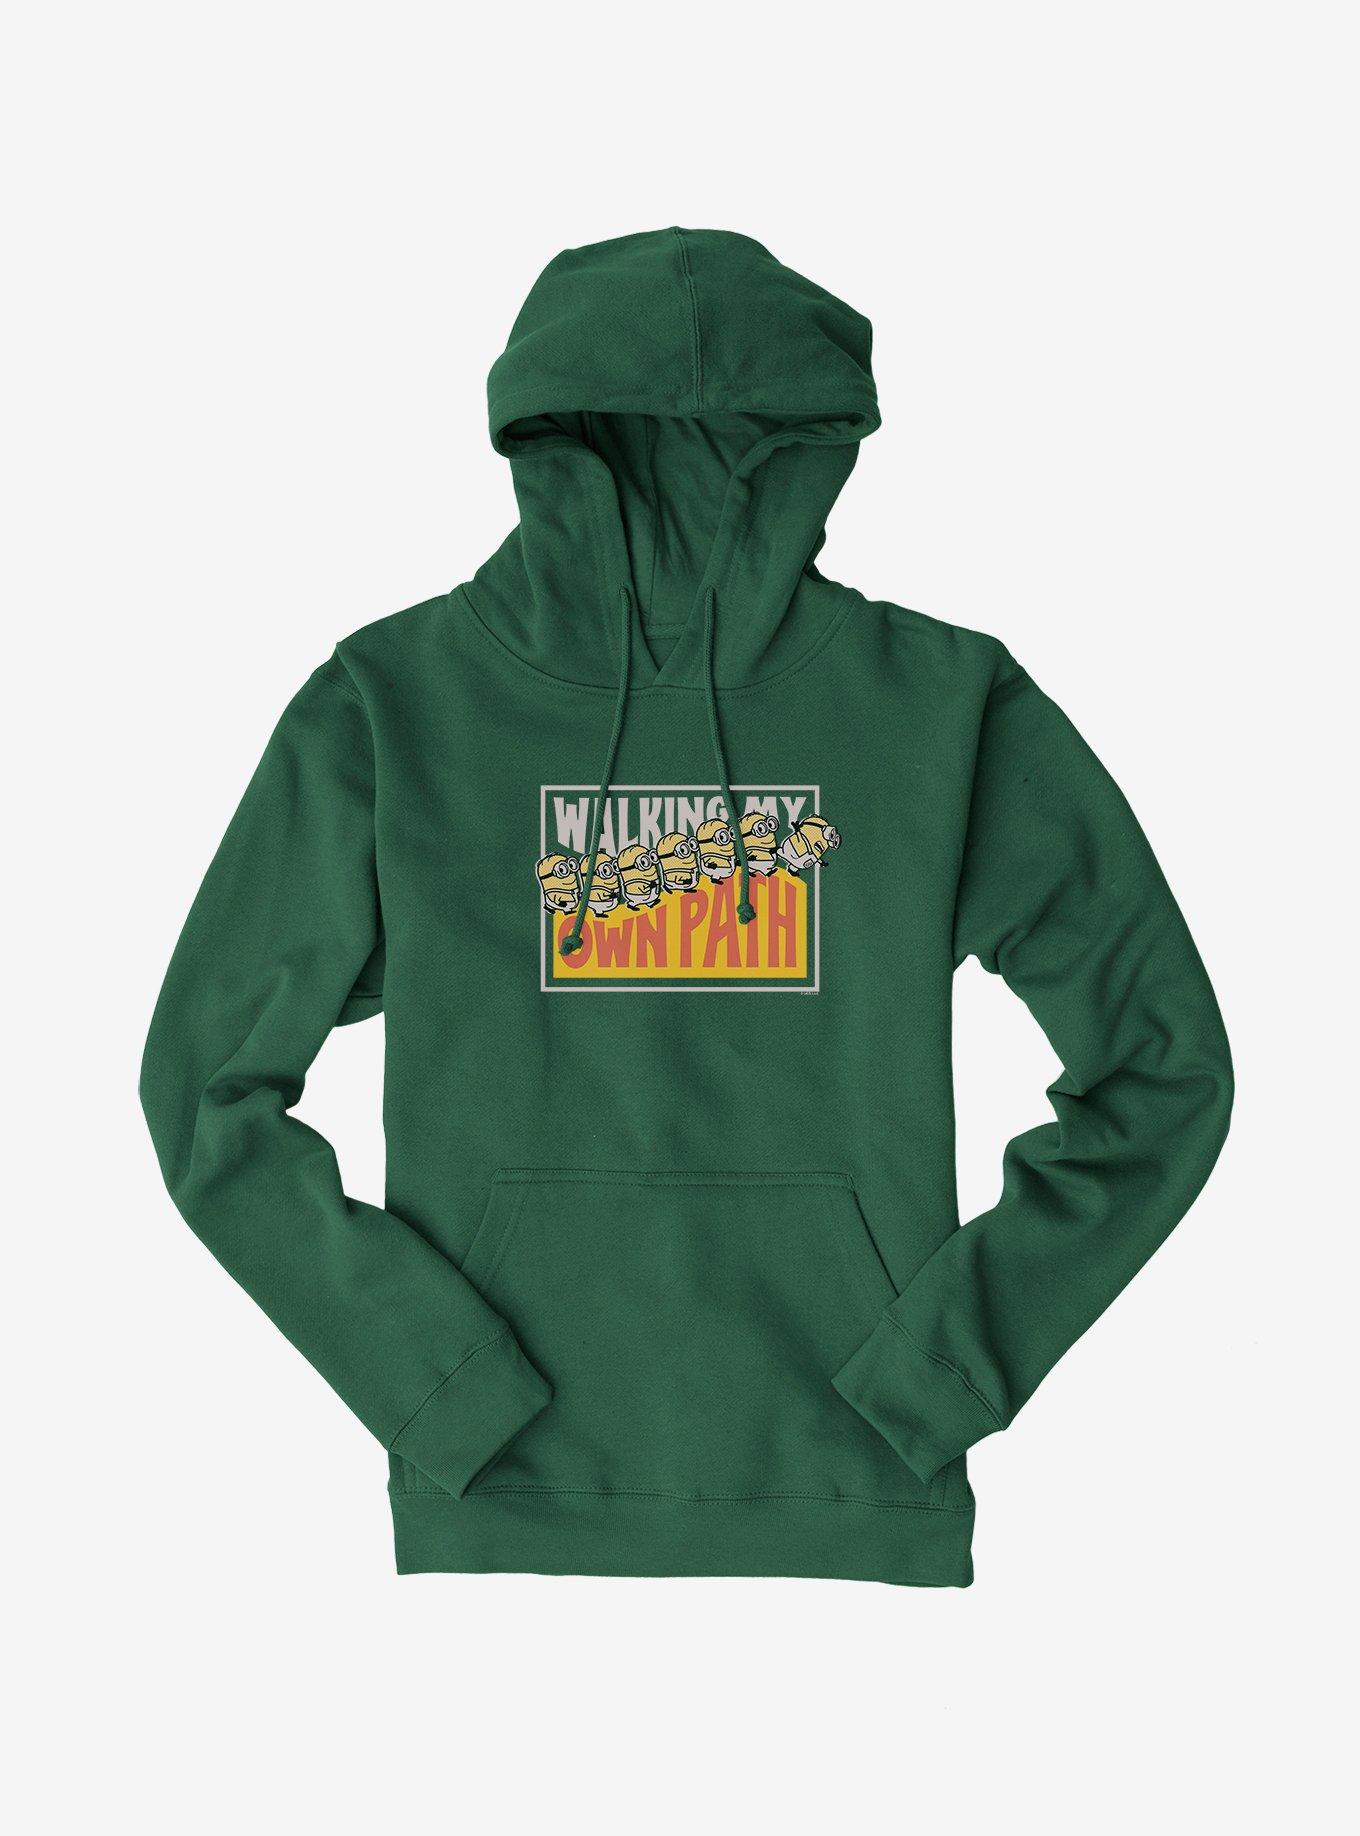 Minions On My Own Path Panel Hoodie, FOREST, hi-res